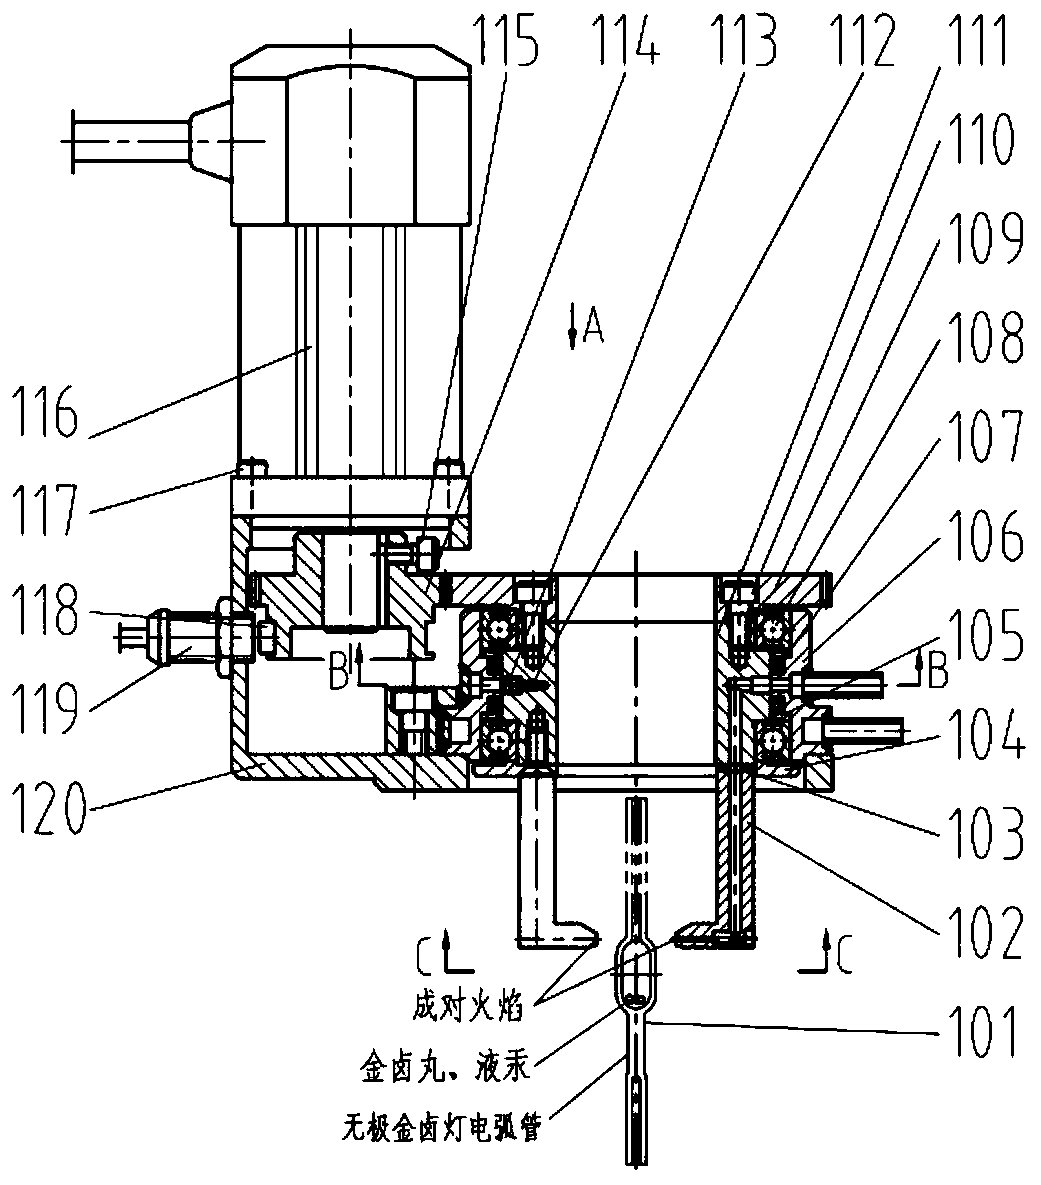 Rotary fire head device for sealing quartz glass tubular device and method thereof